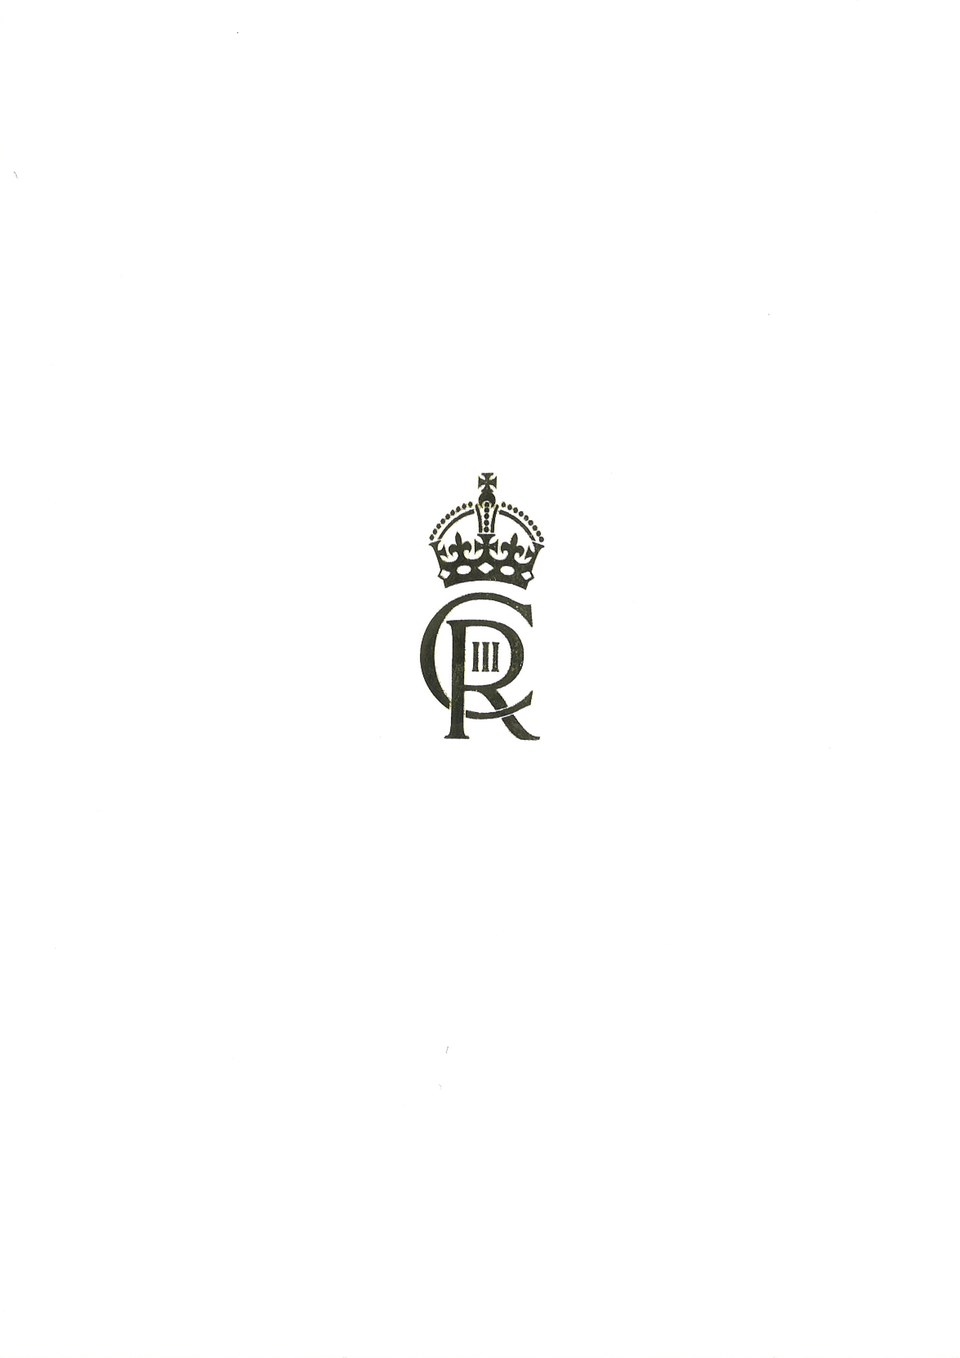 The front of the fold-out card is decorated with a gold emblem with the initials C (for Charles) R (for Rex).